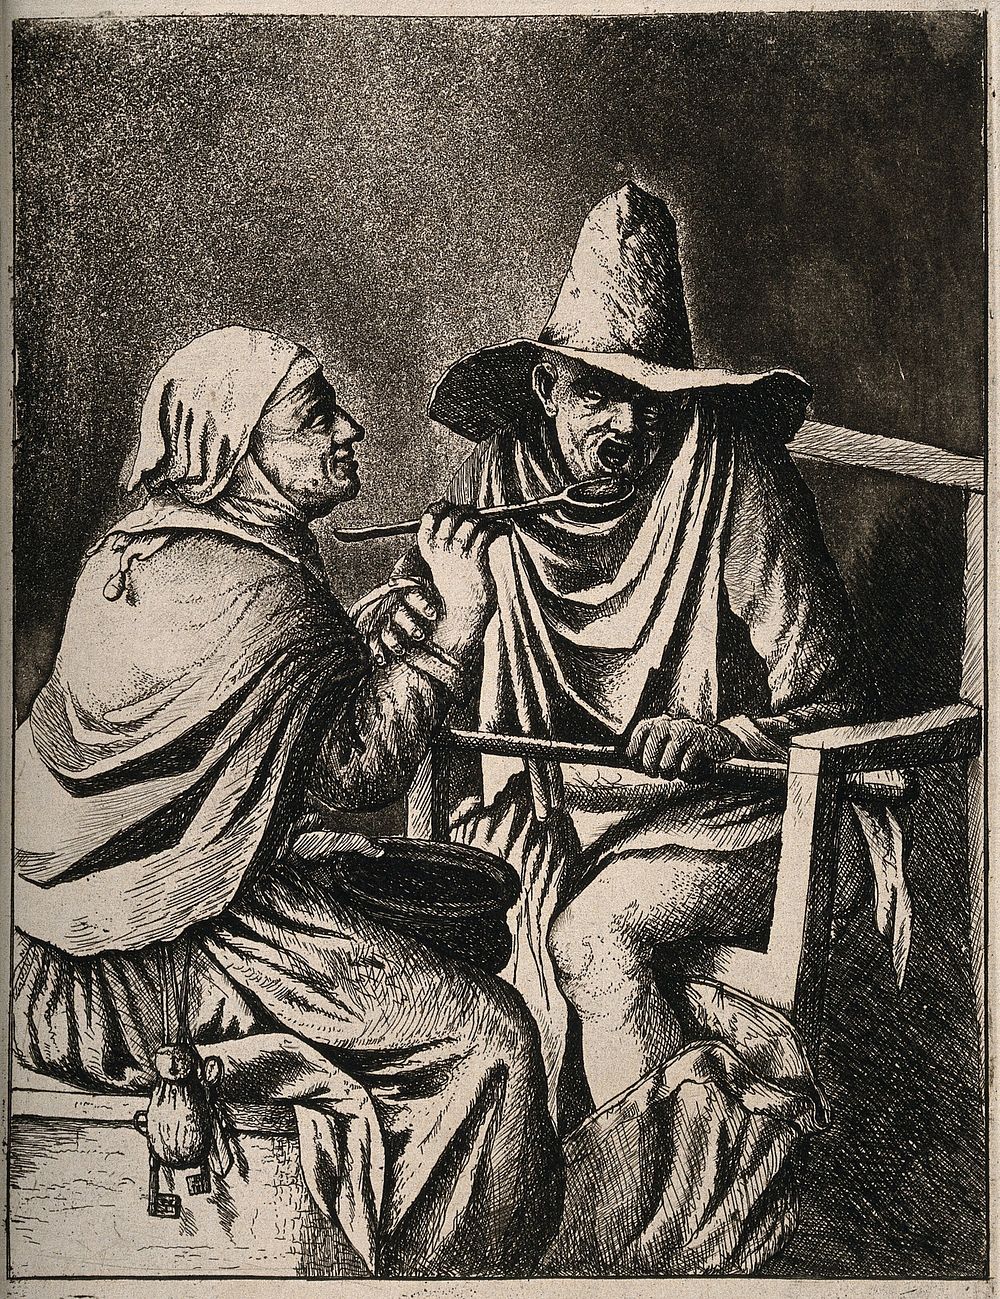 A woman spoon-feeding a man while he is on the toilet, perhaps as one would a child. Etching by D. Deuchar .